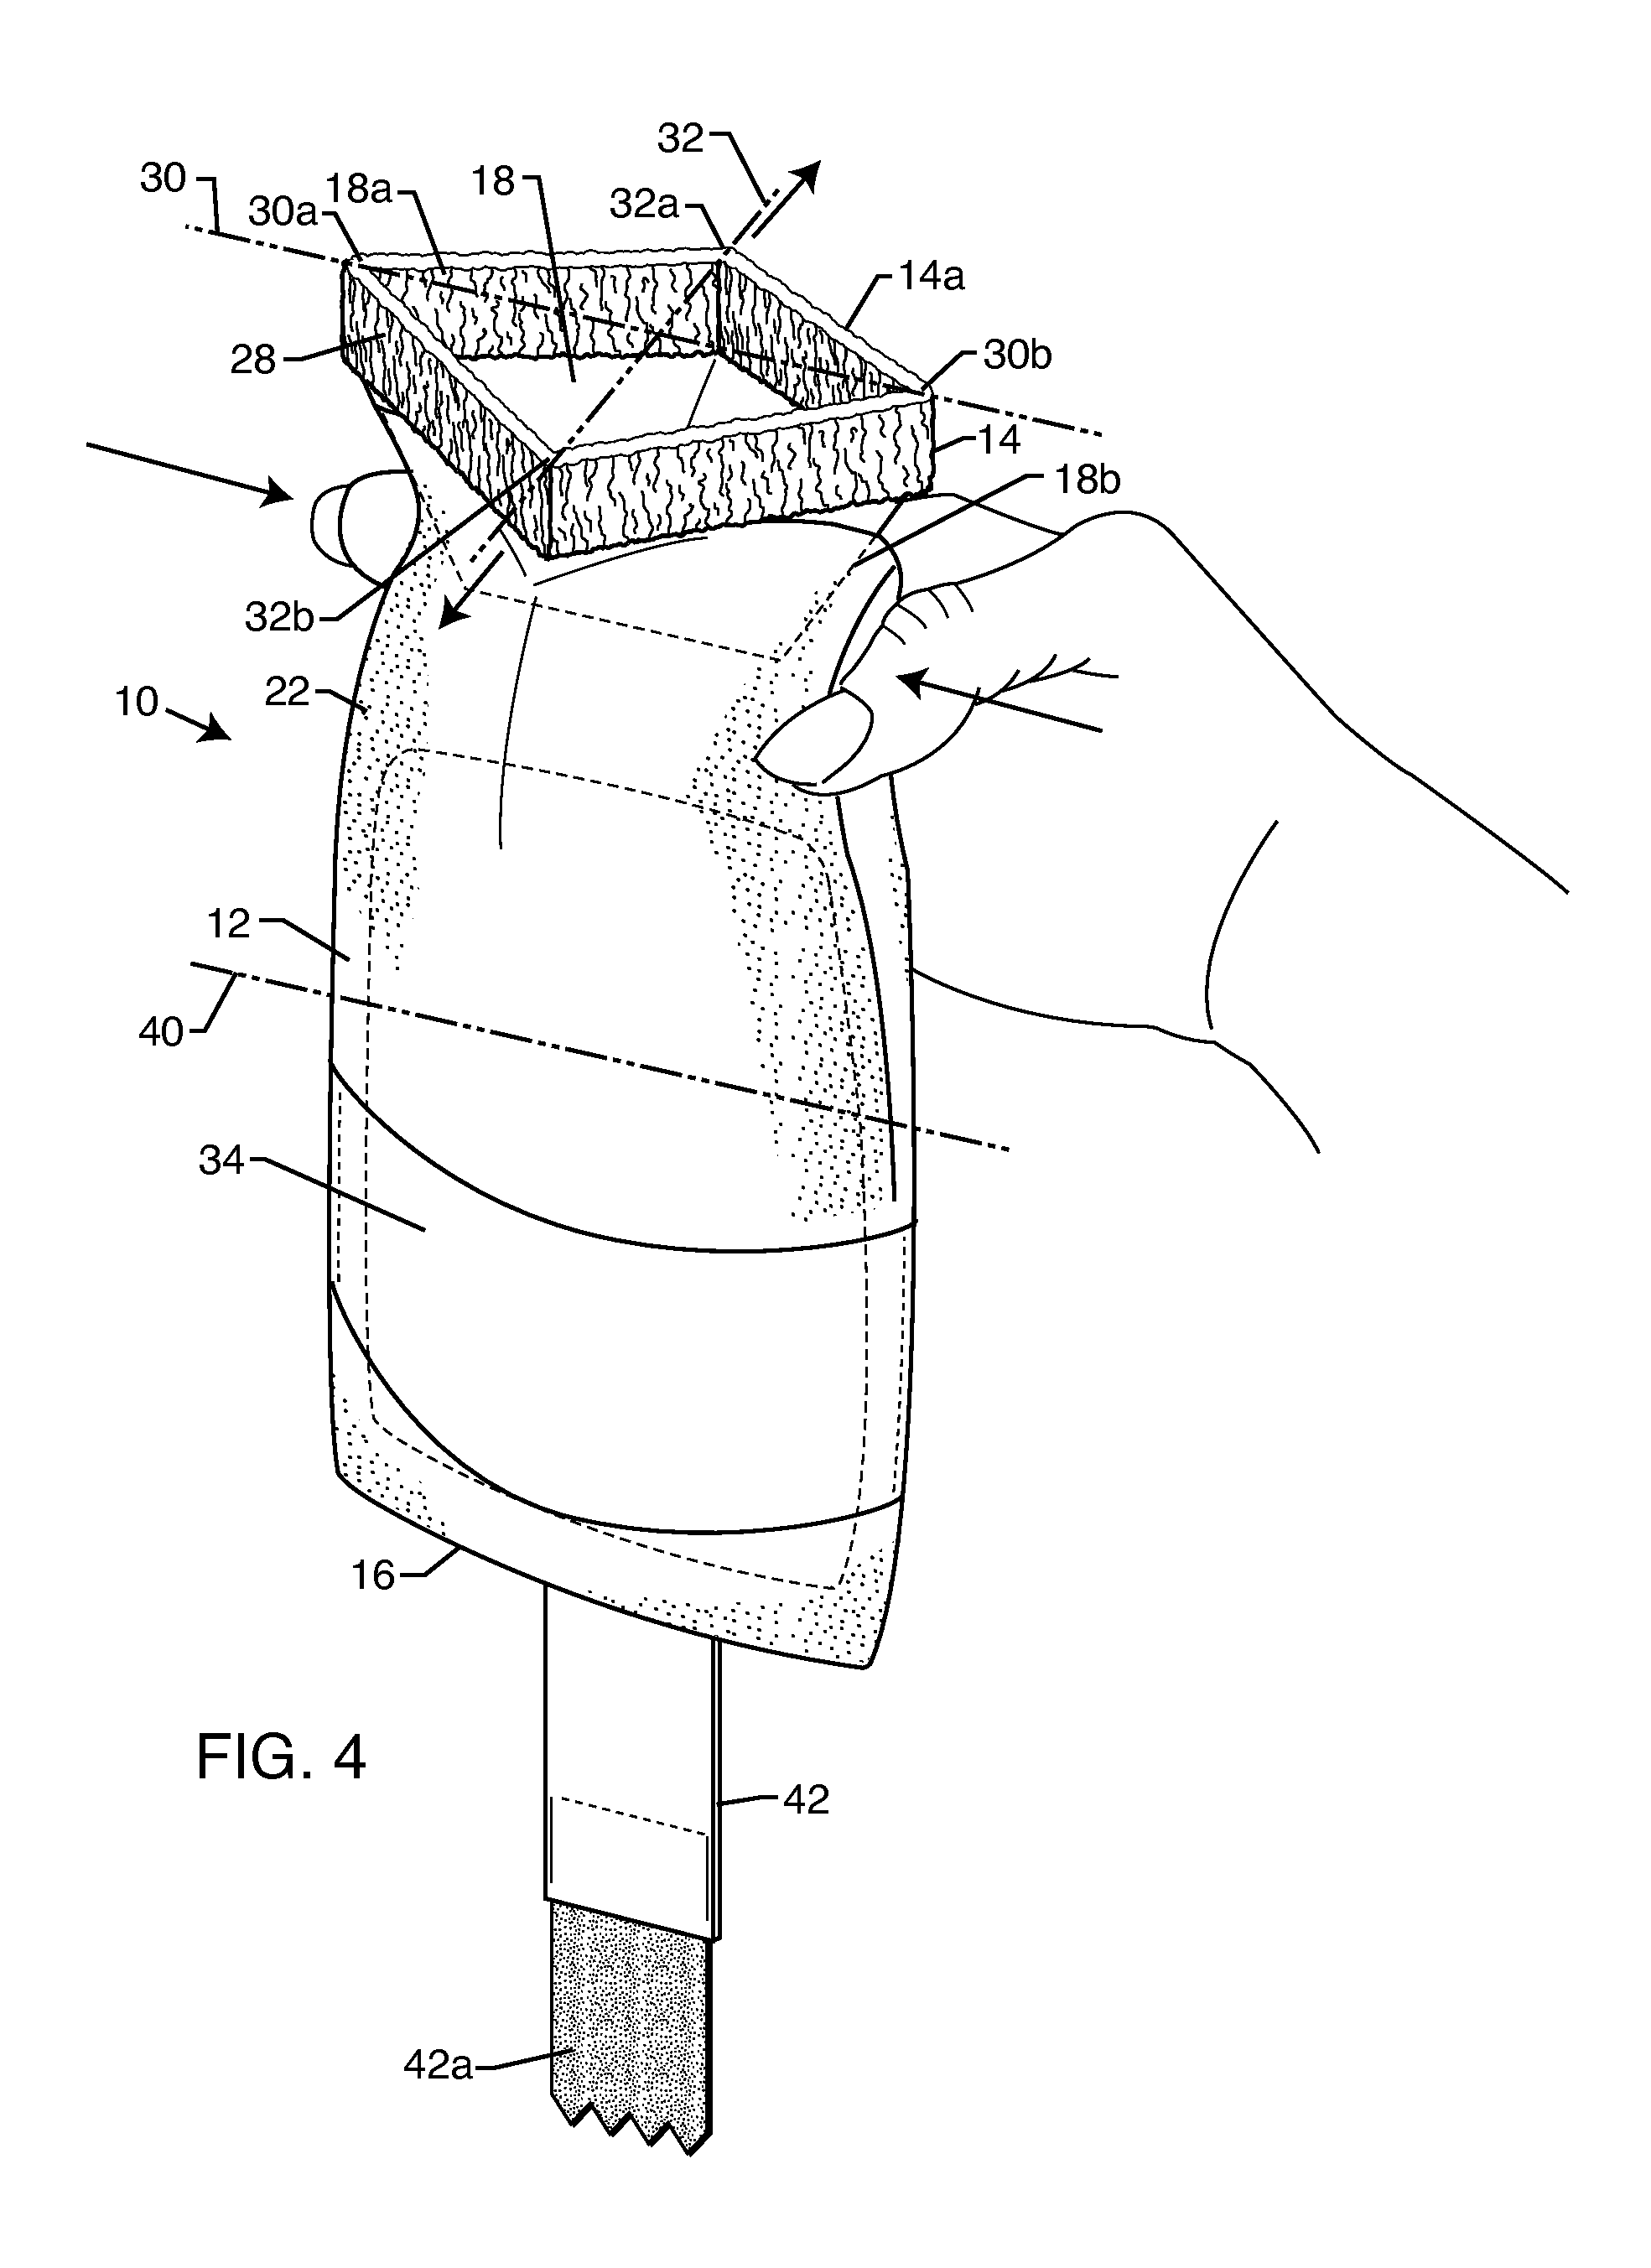 Disposable urine collection device